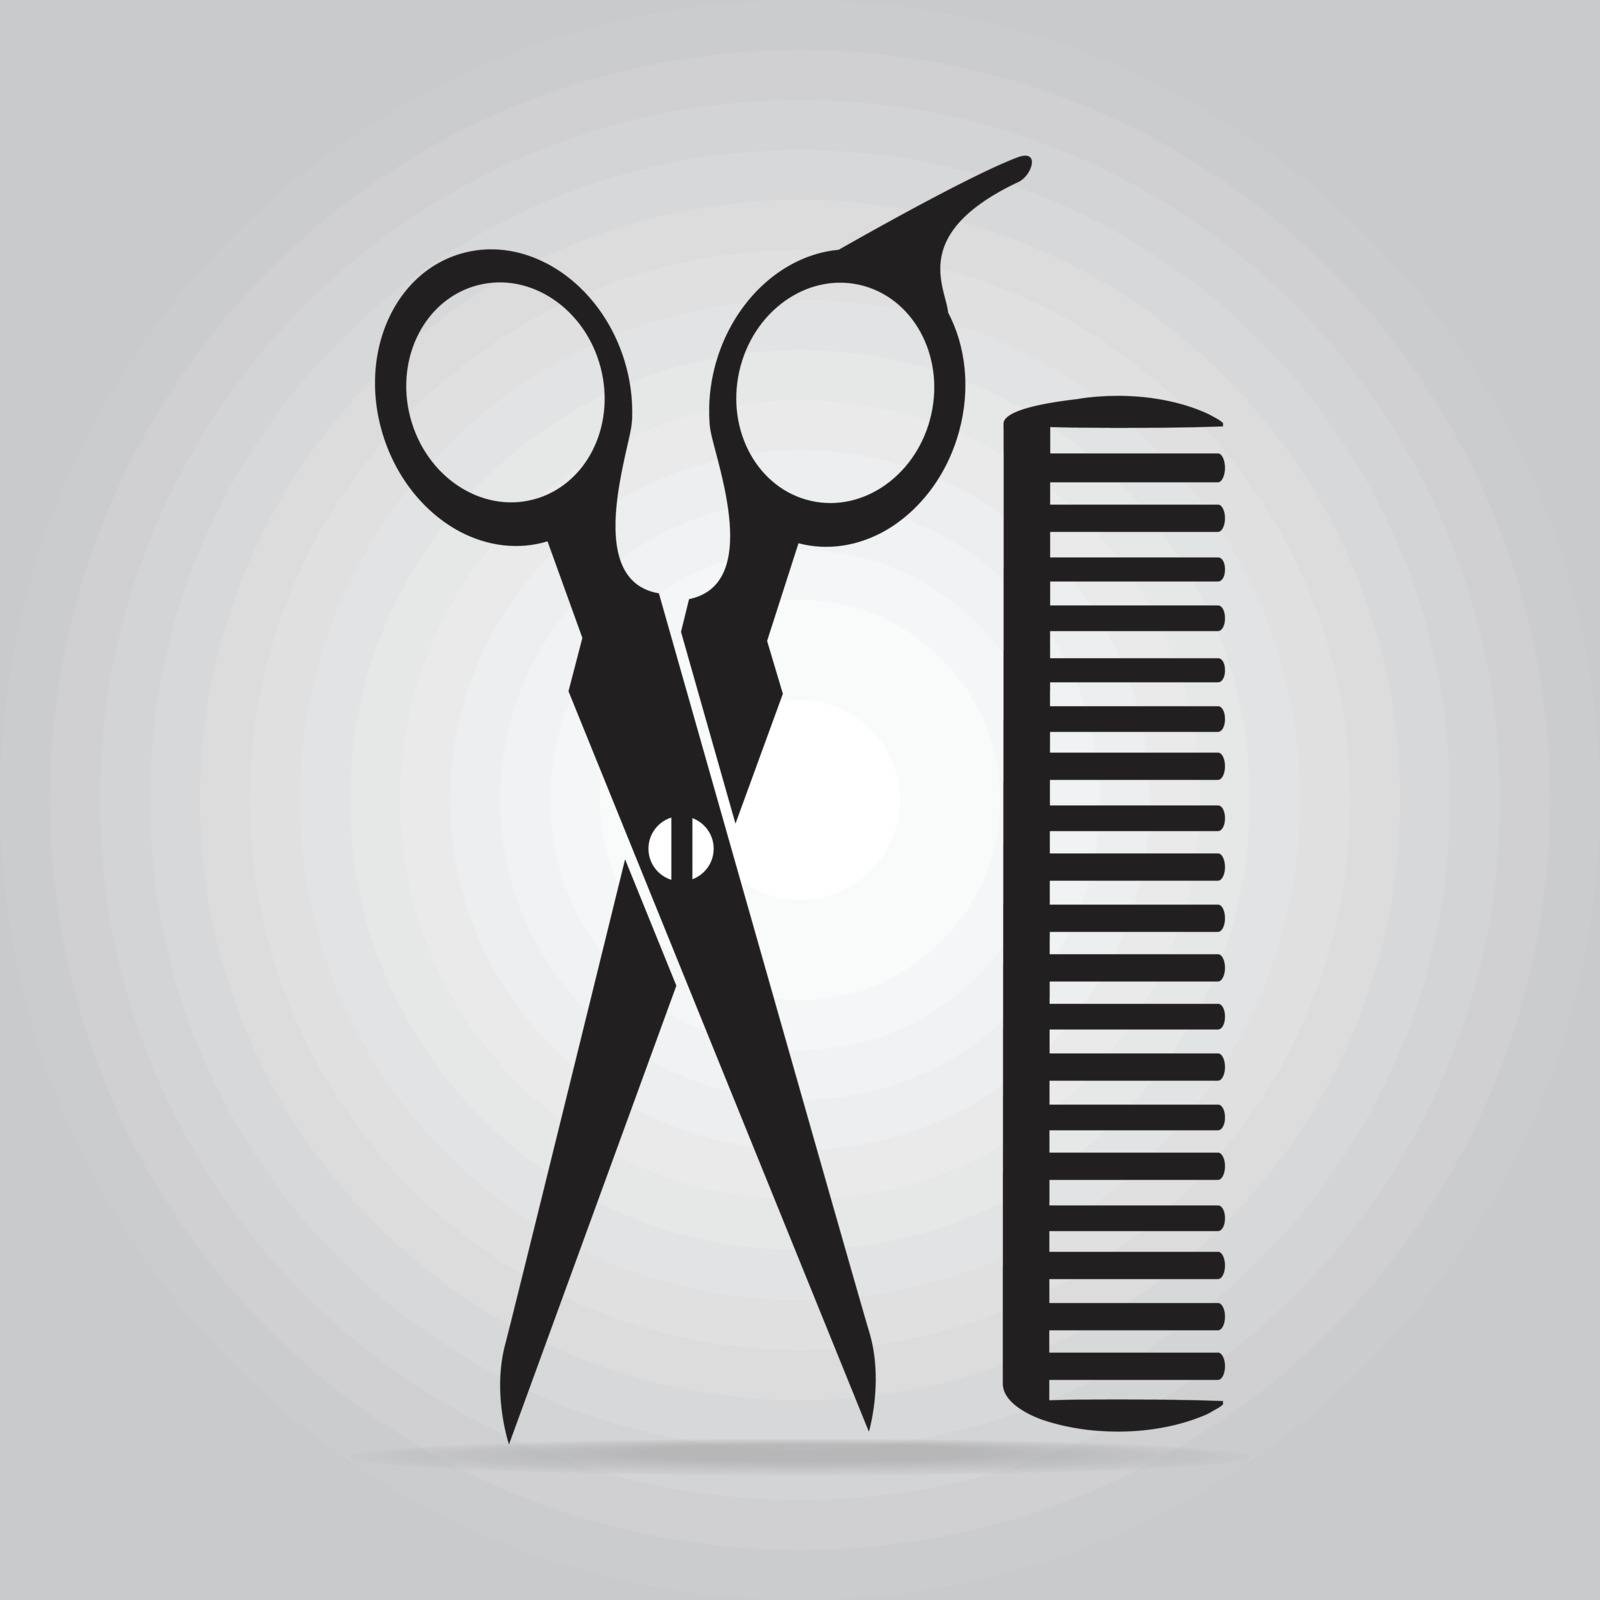 Hair salon with scissors and comb icon by Kheat